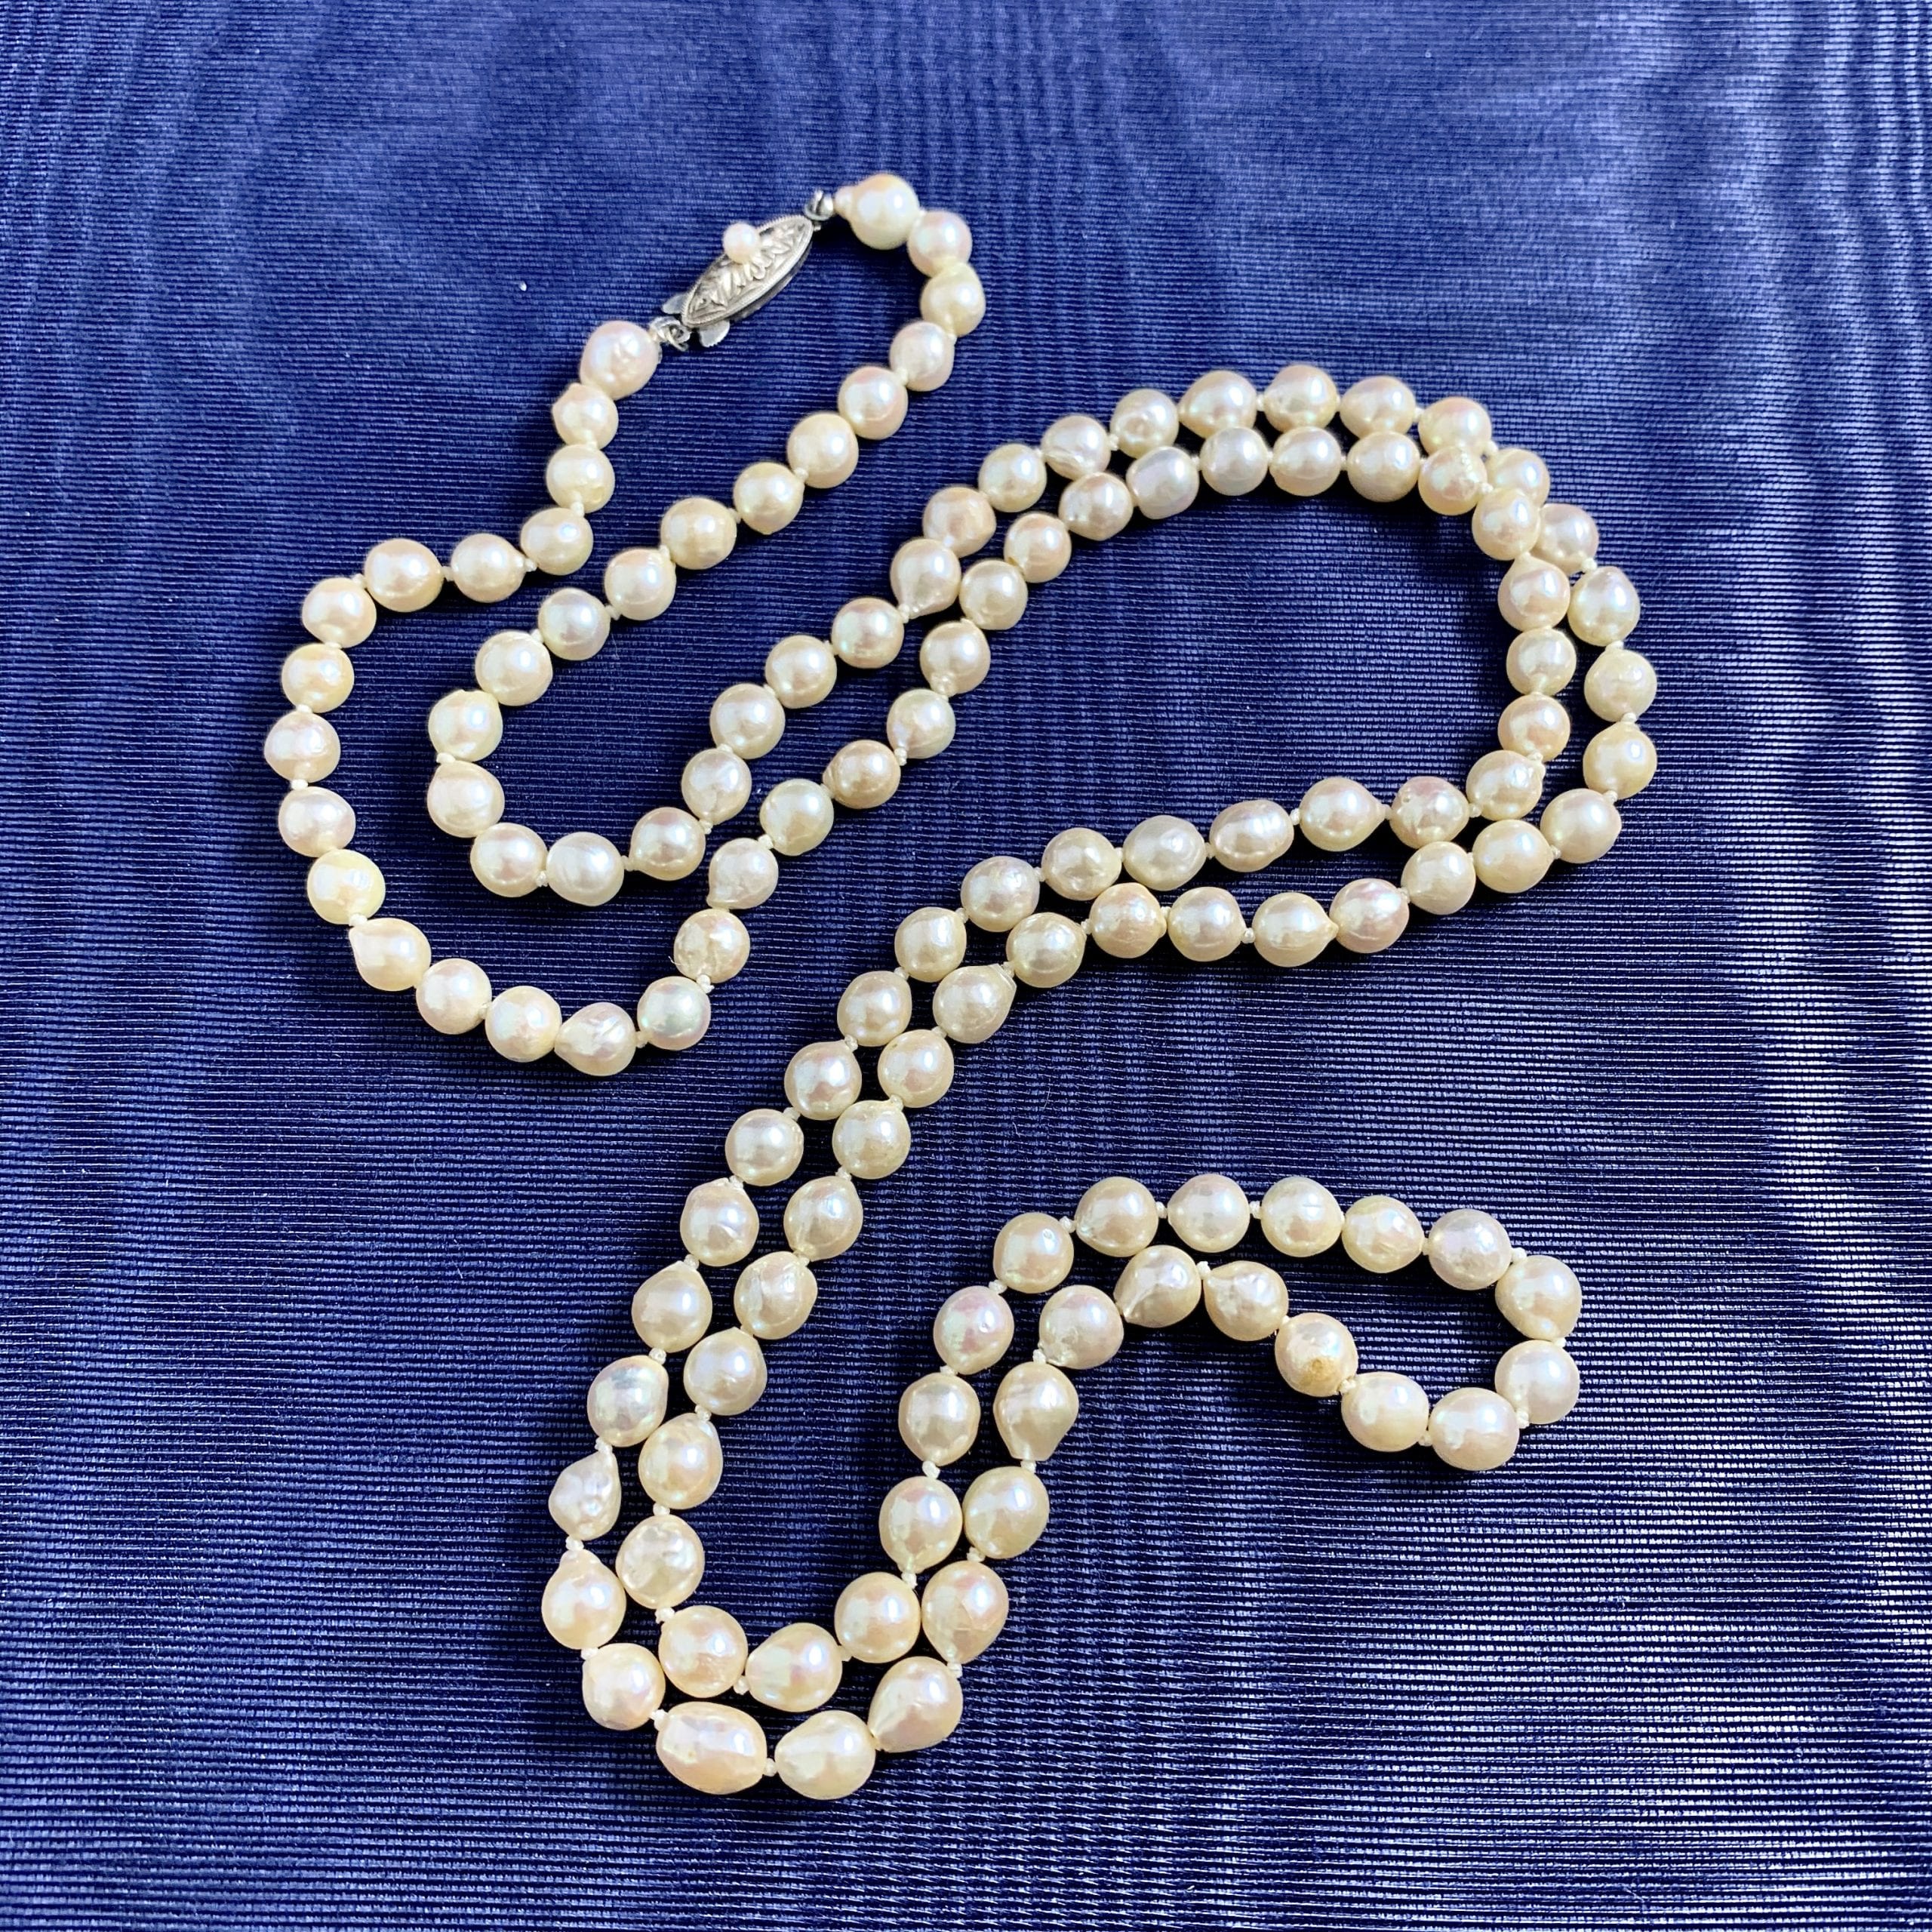 Natural 3 Rows 7-8mm White Cultured Pearl & Alexandrite Beads Necklace  17-19